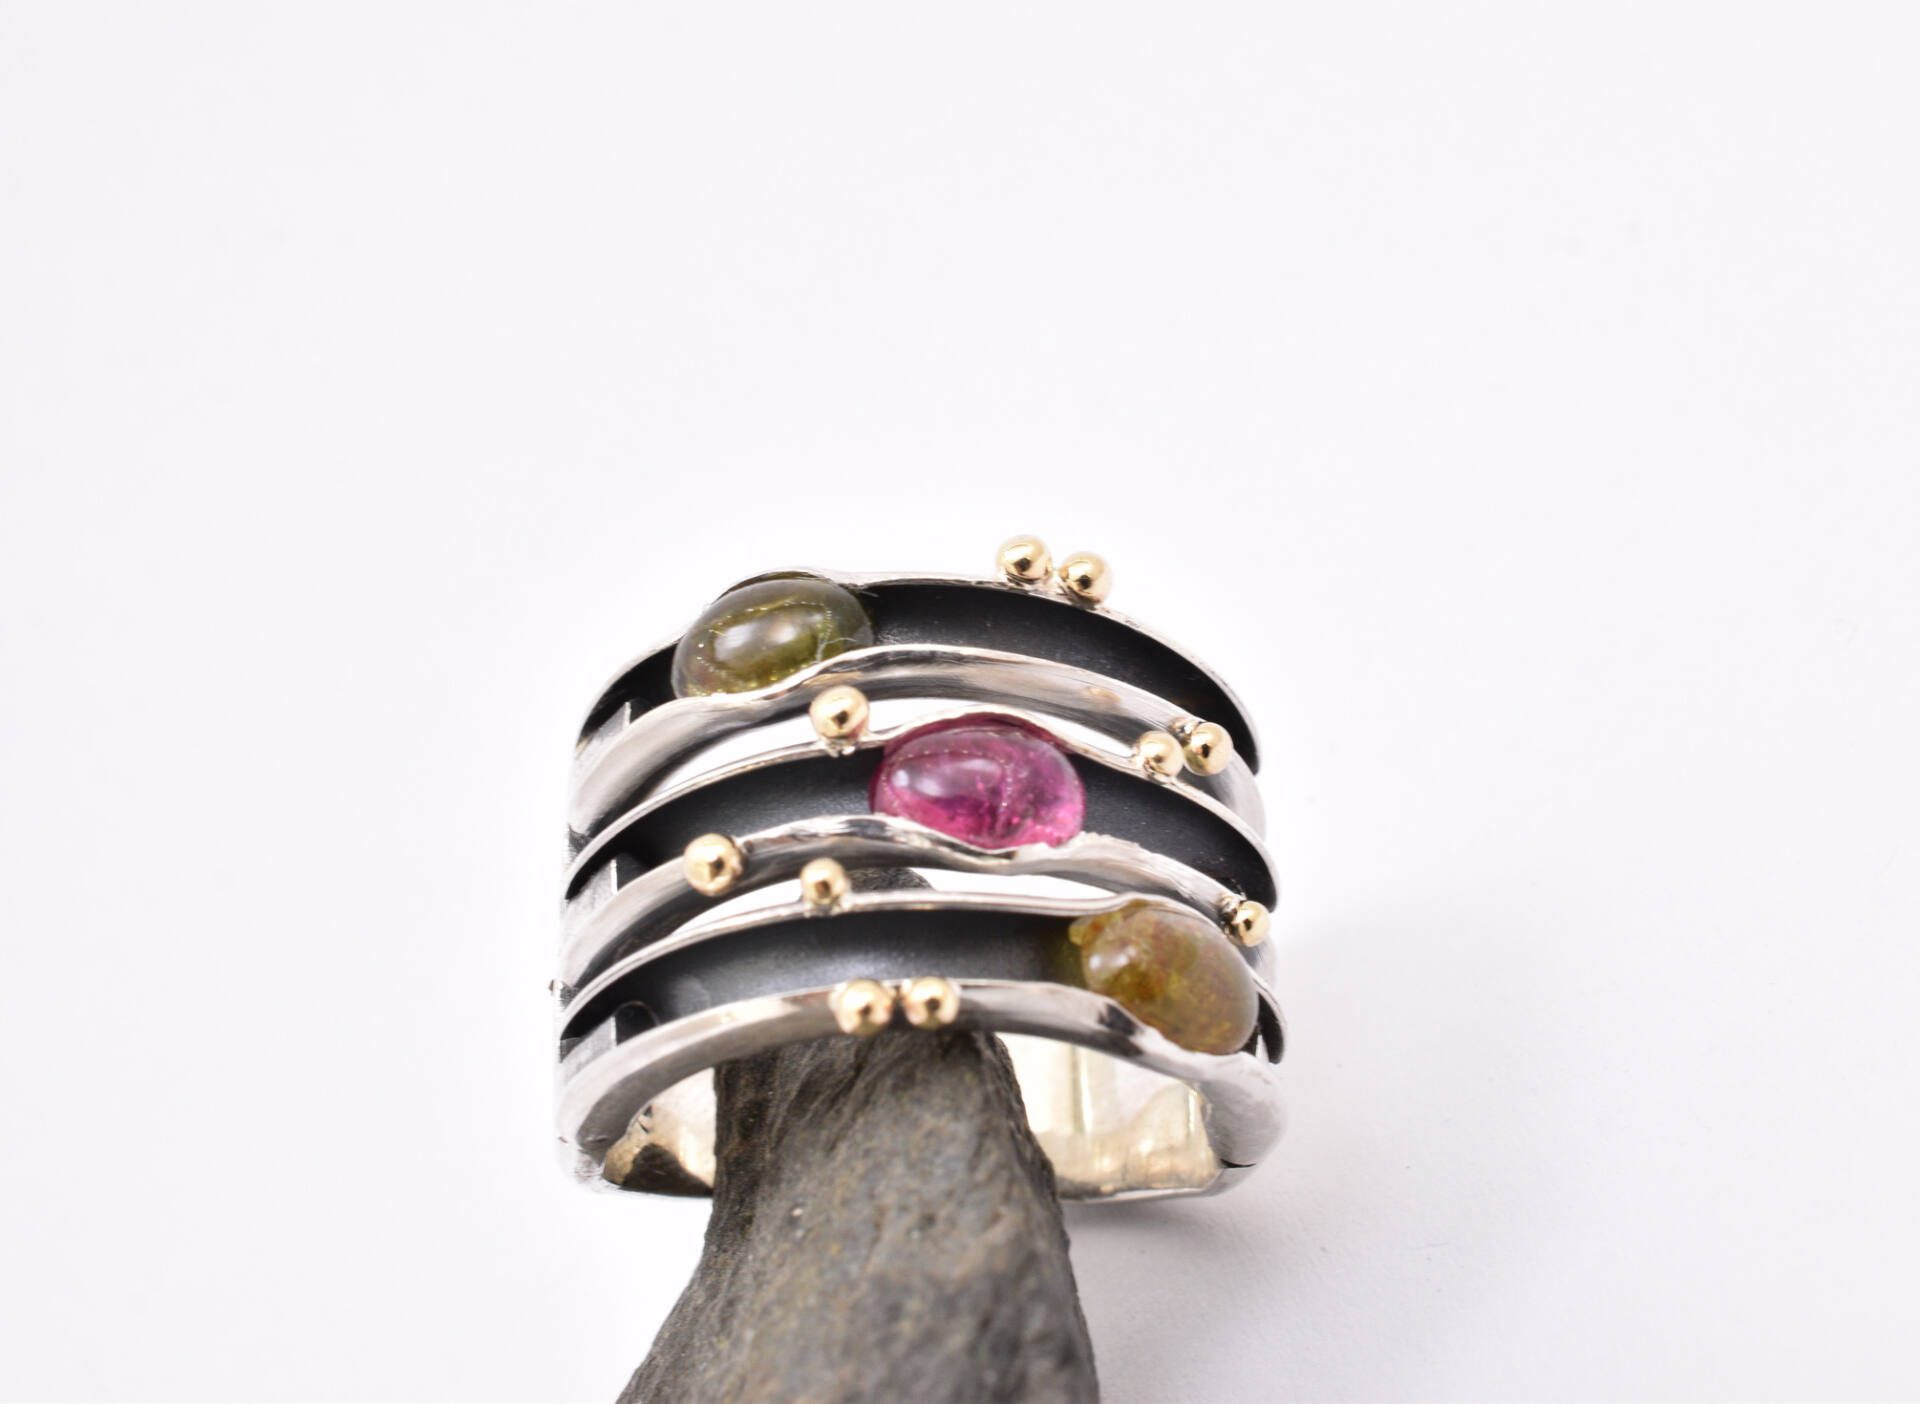 Tourmaline ring from sterling silver and gold